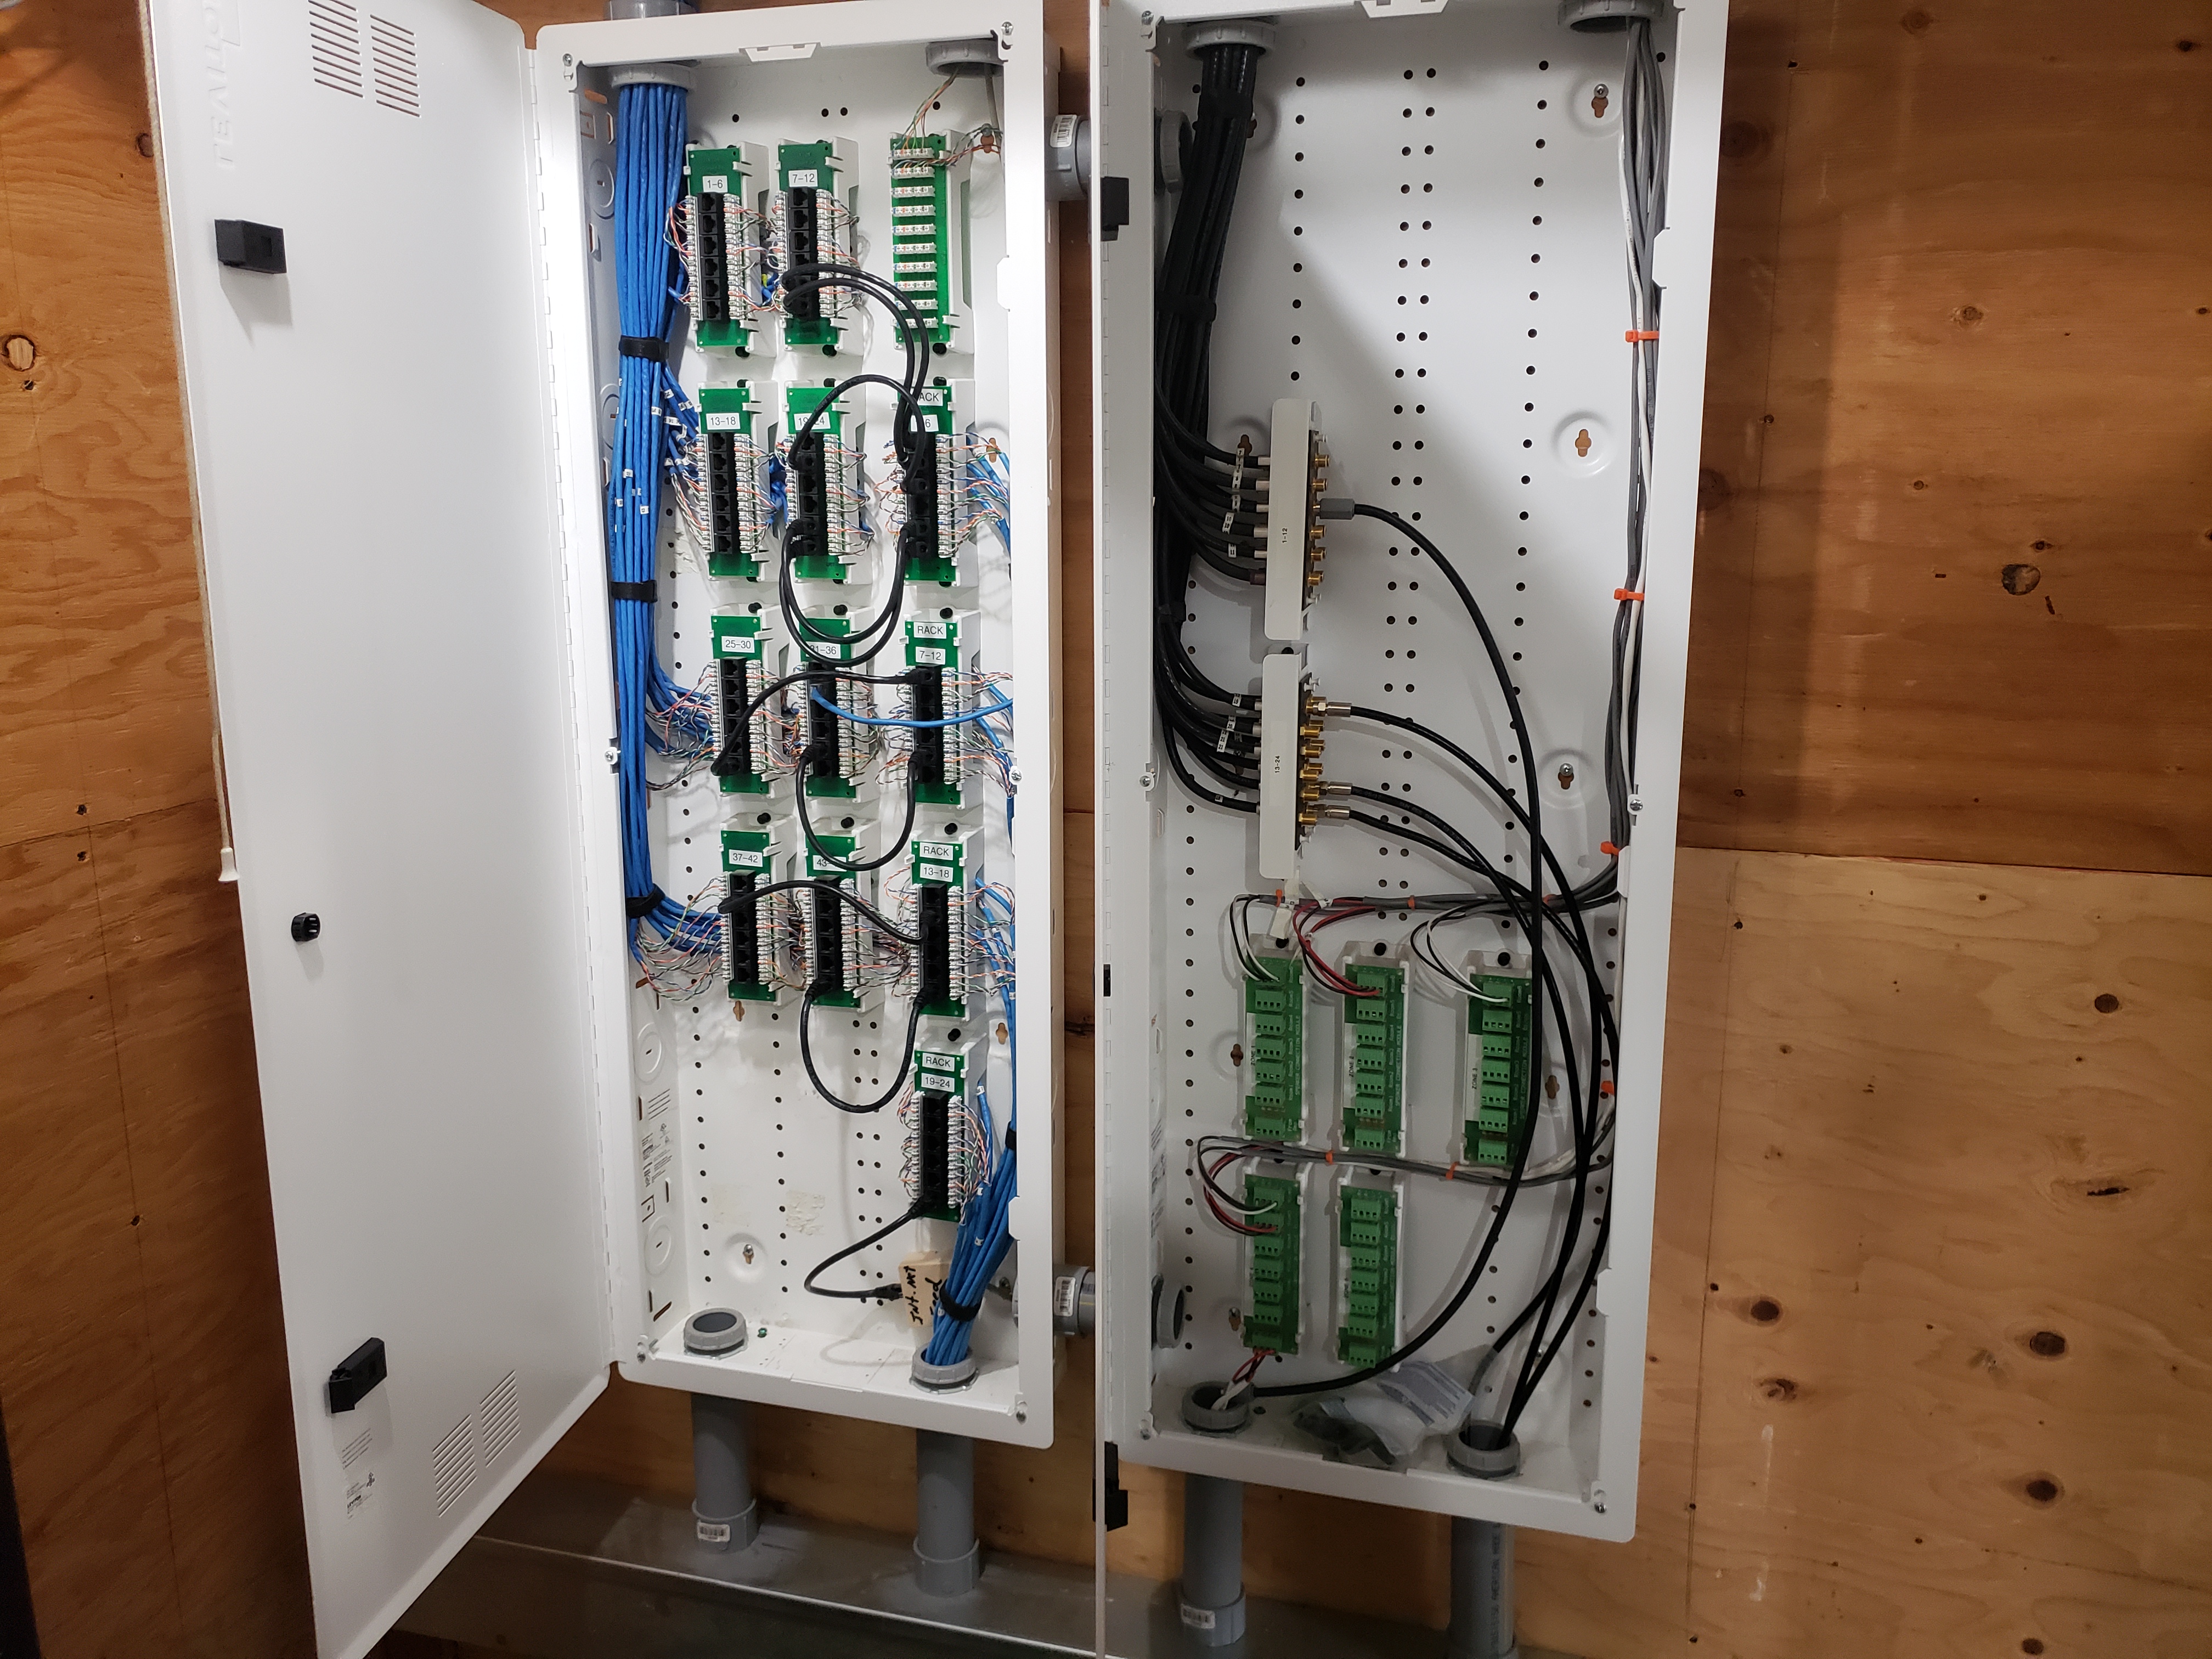 2019 Low Voltage Wiring Guide-New Construction - Smart ...